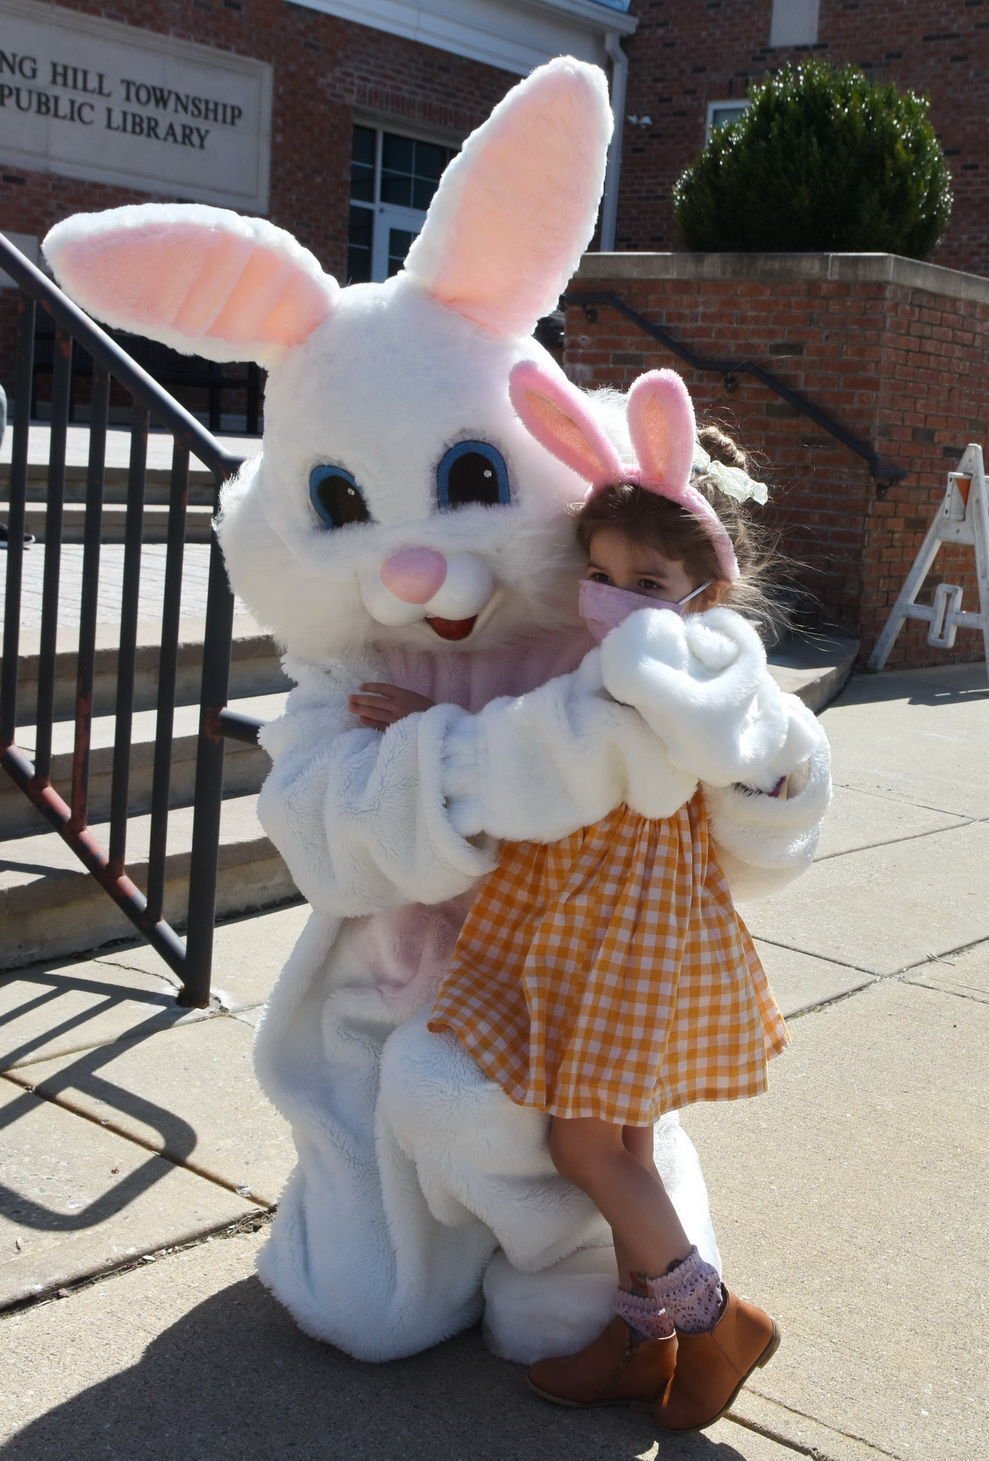 (PHOTOS) Peter Cottontail greets Long Hill youngsters | Echoes-Sentinel